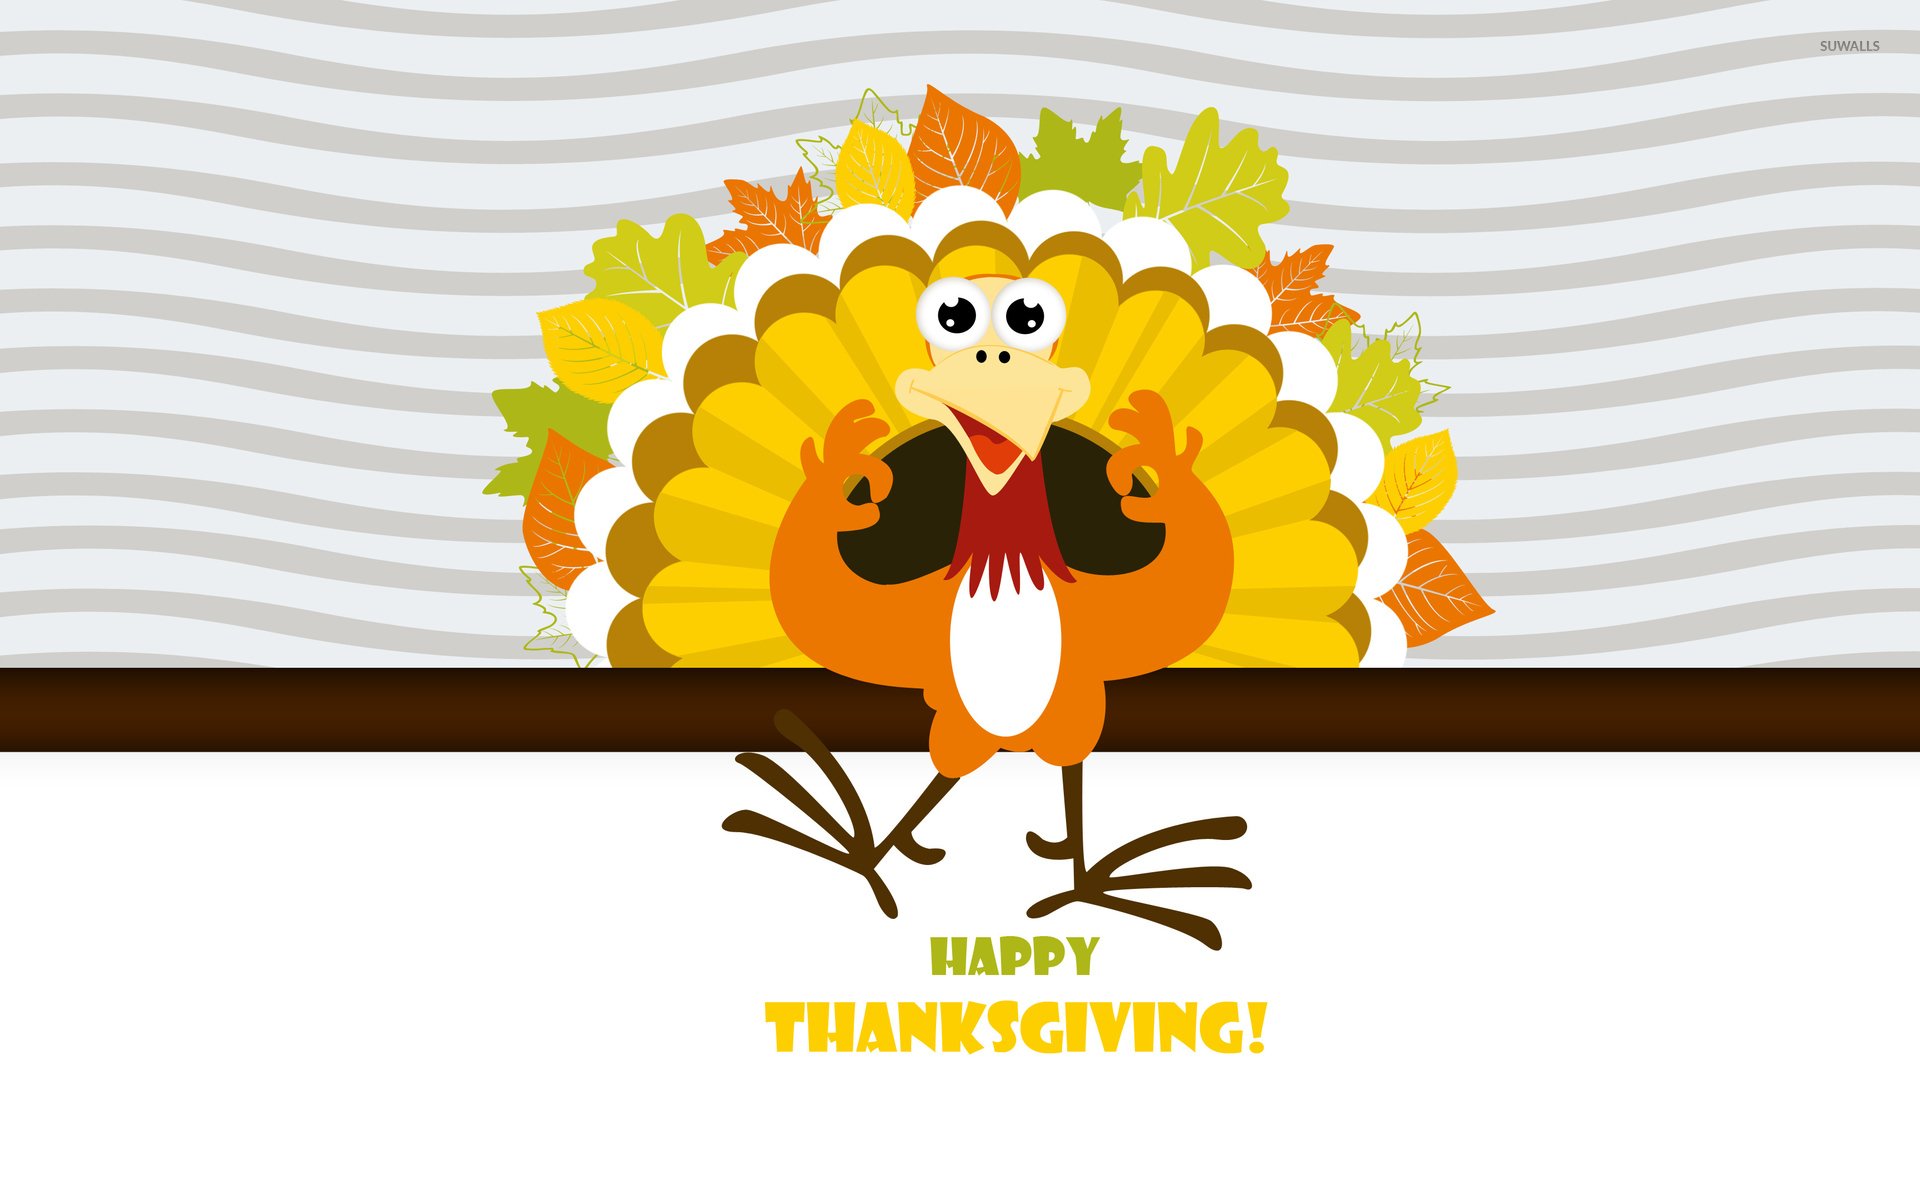 Happy Thanksgiving turkey wallpaper   Holiday wallpapers   50081